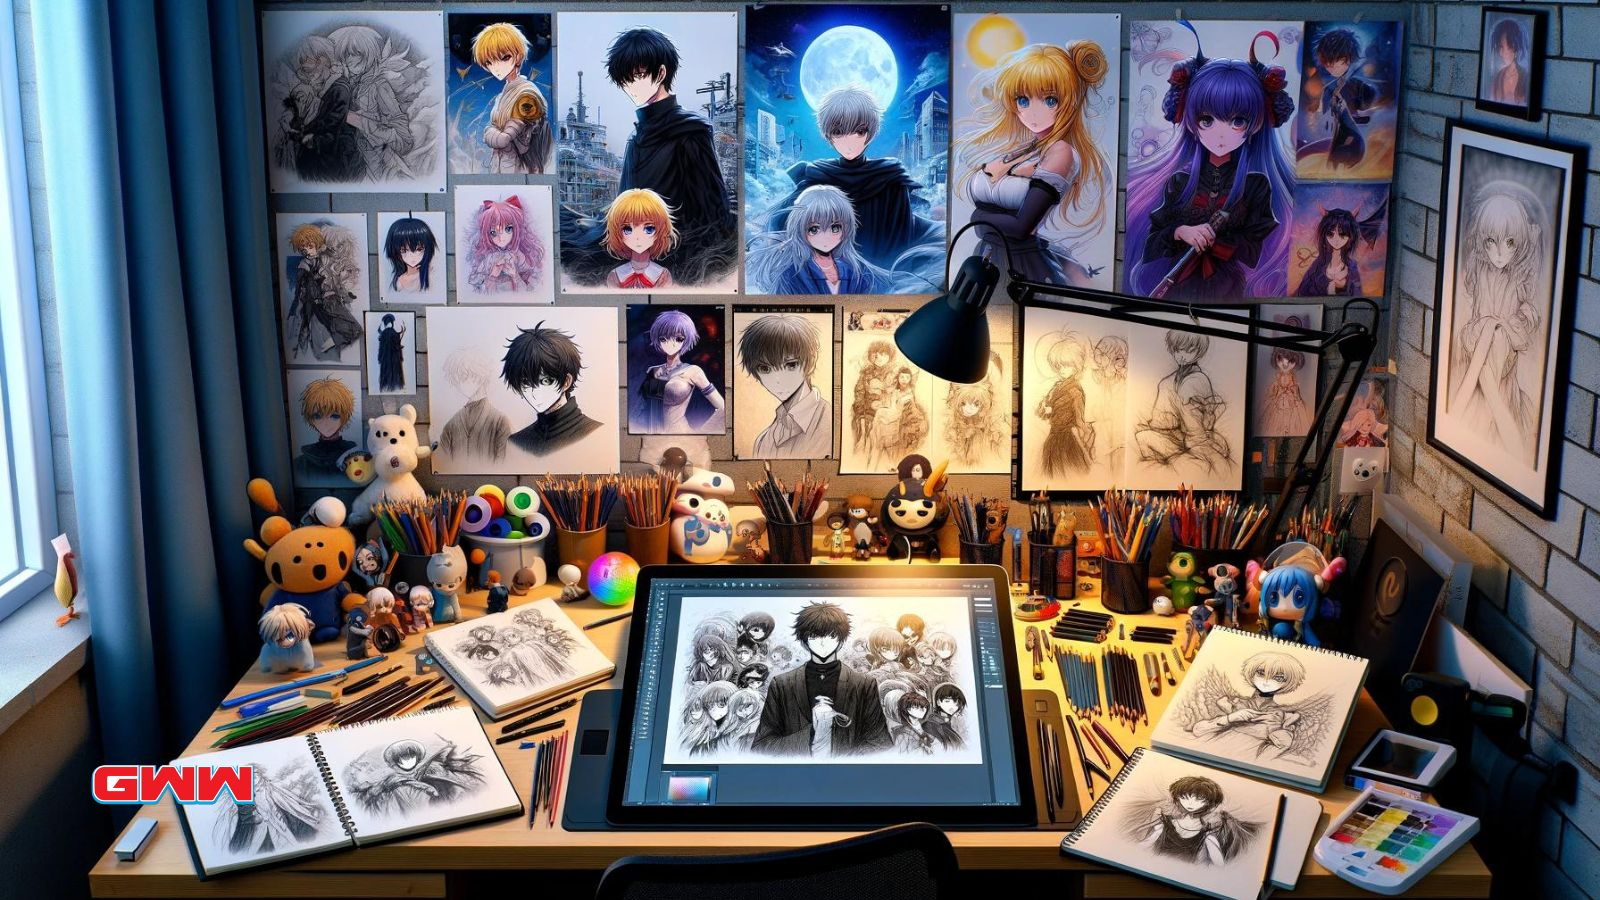 Artist's workspace with anime character sketches, tools, and figurines